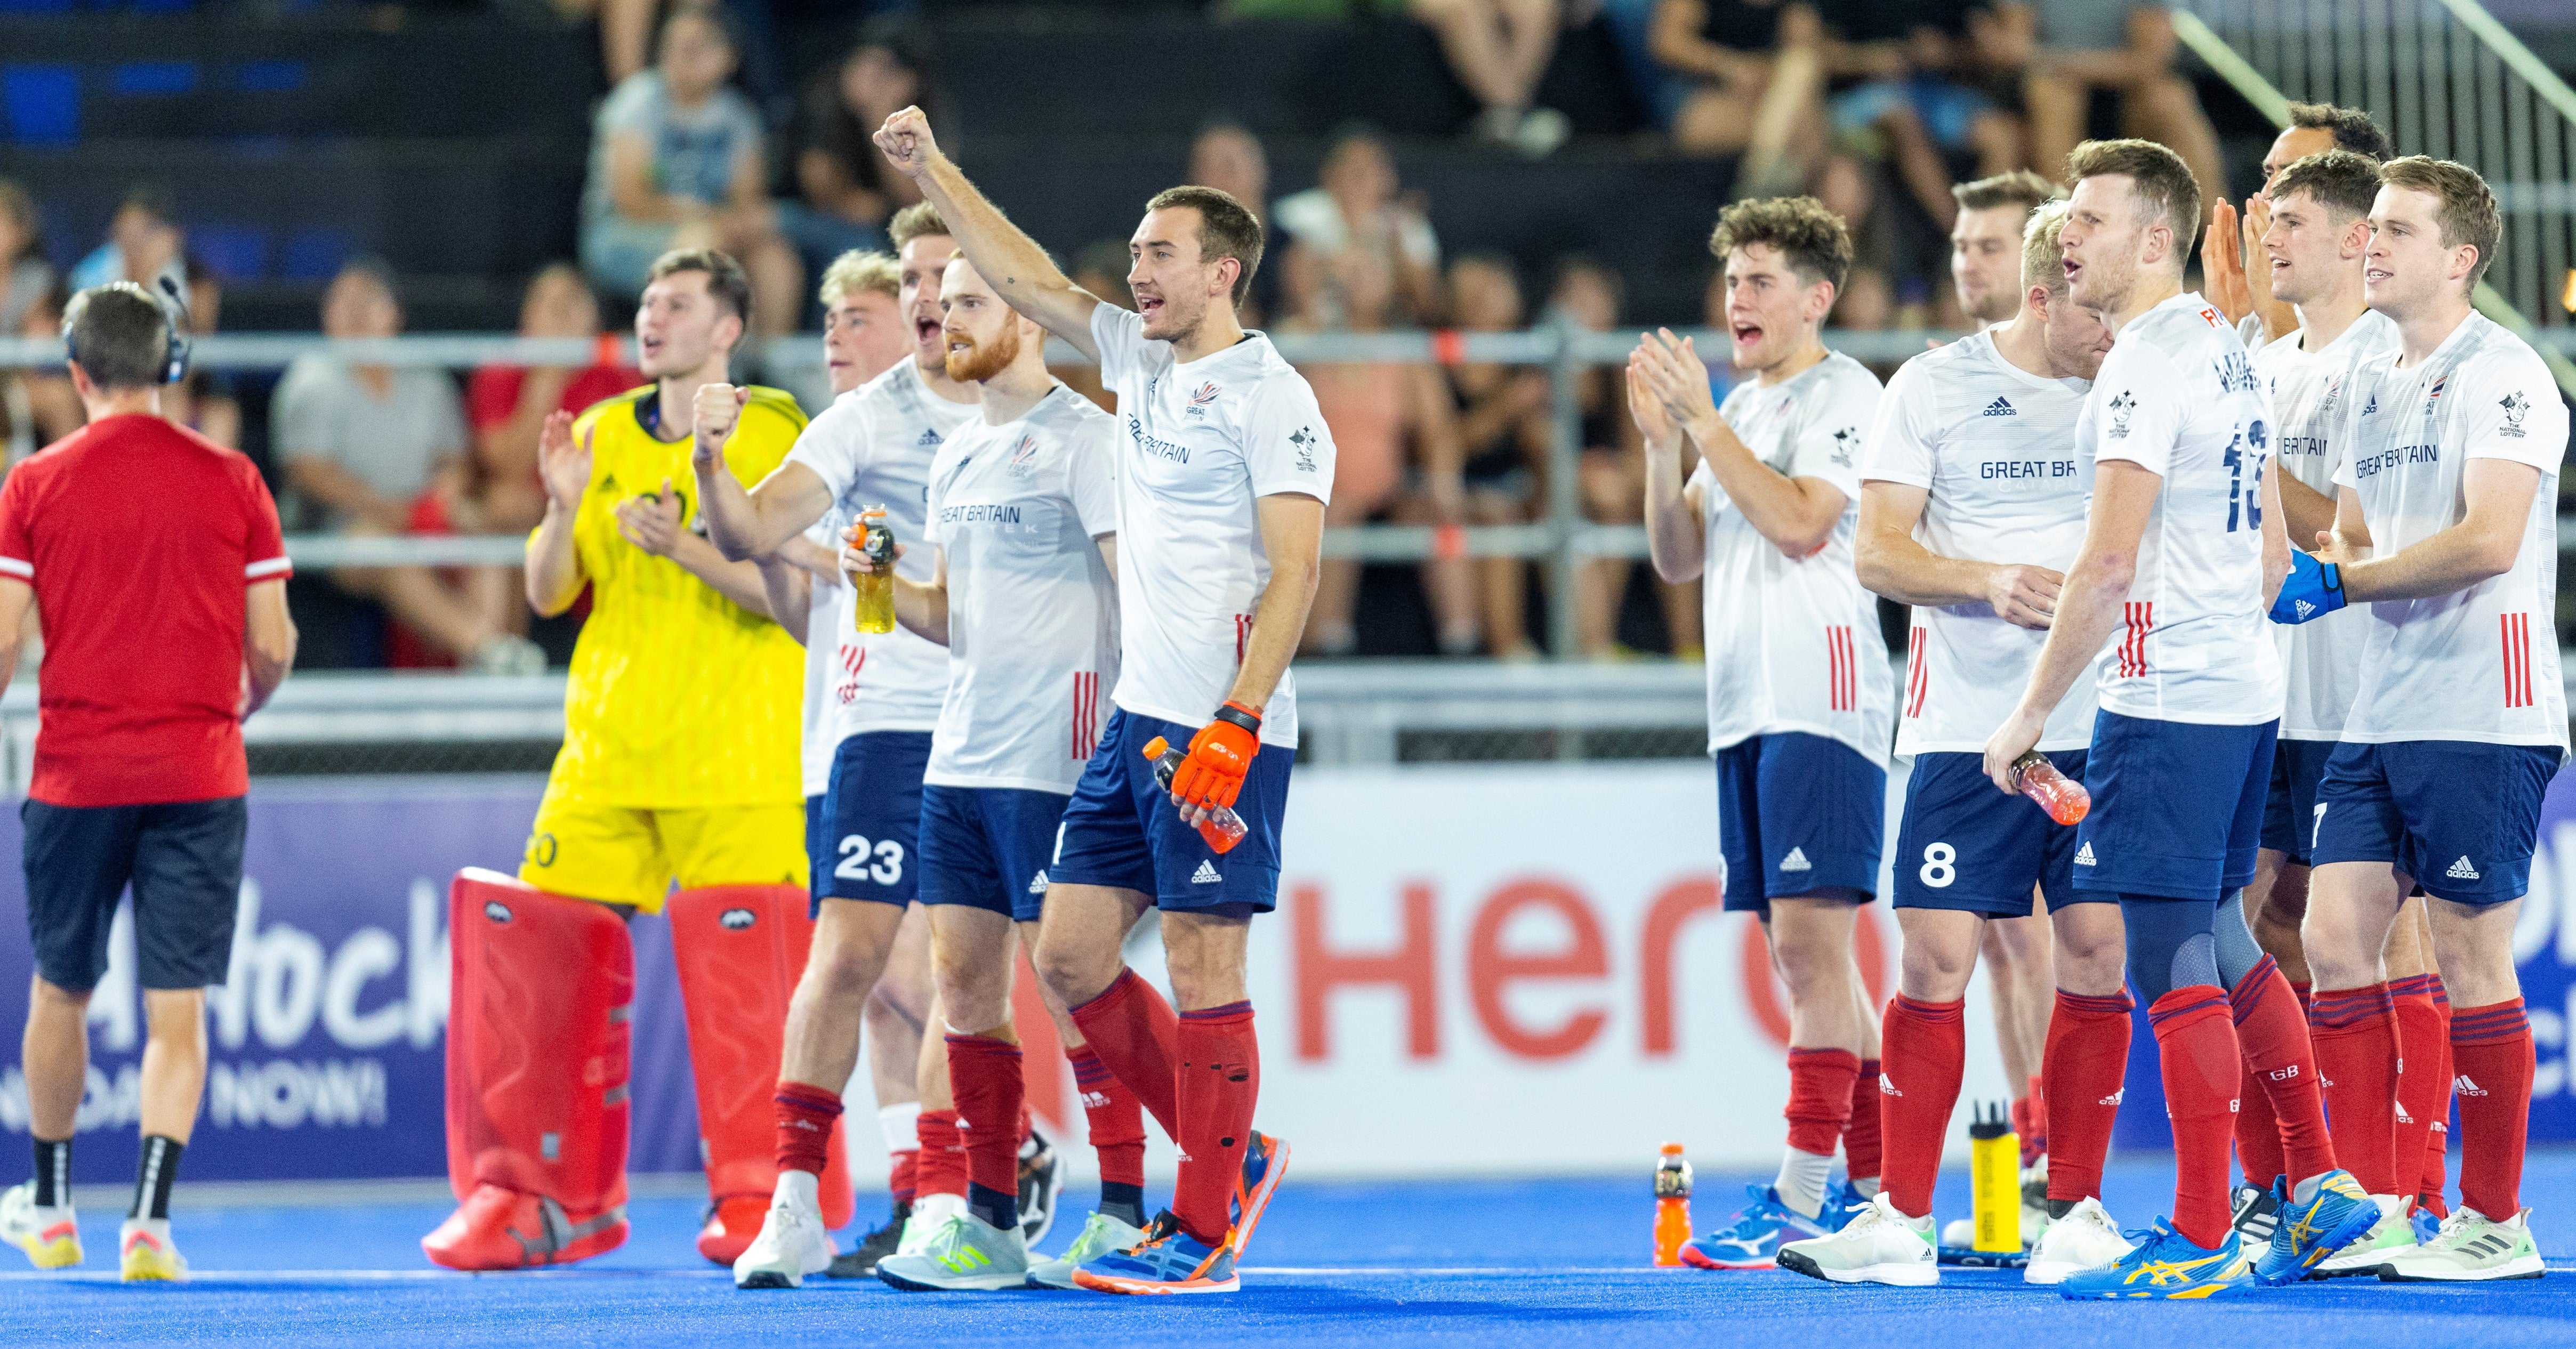 Great Britains men and women resume FIH Pro League campaign with New Zealand leg